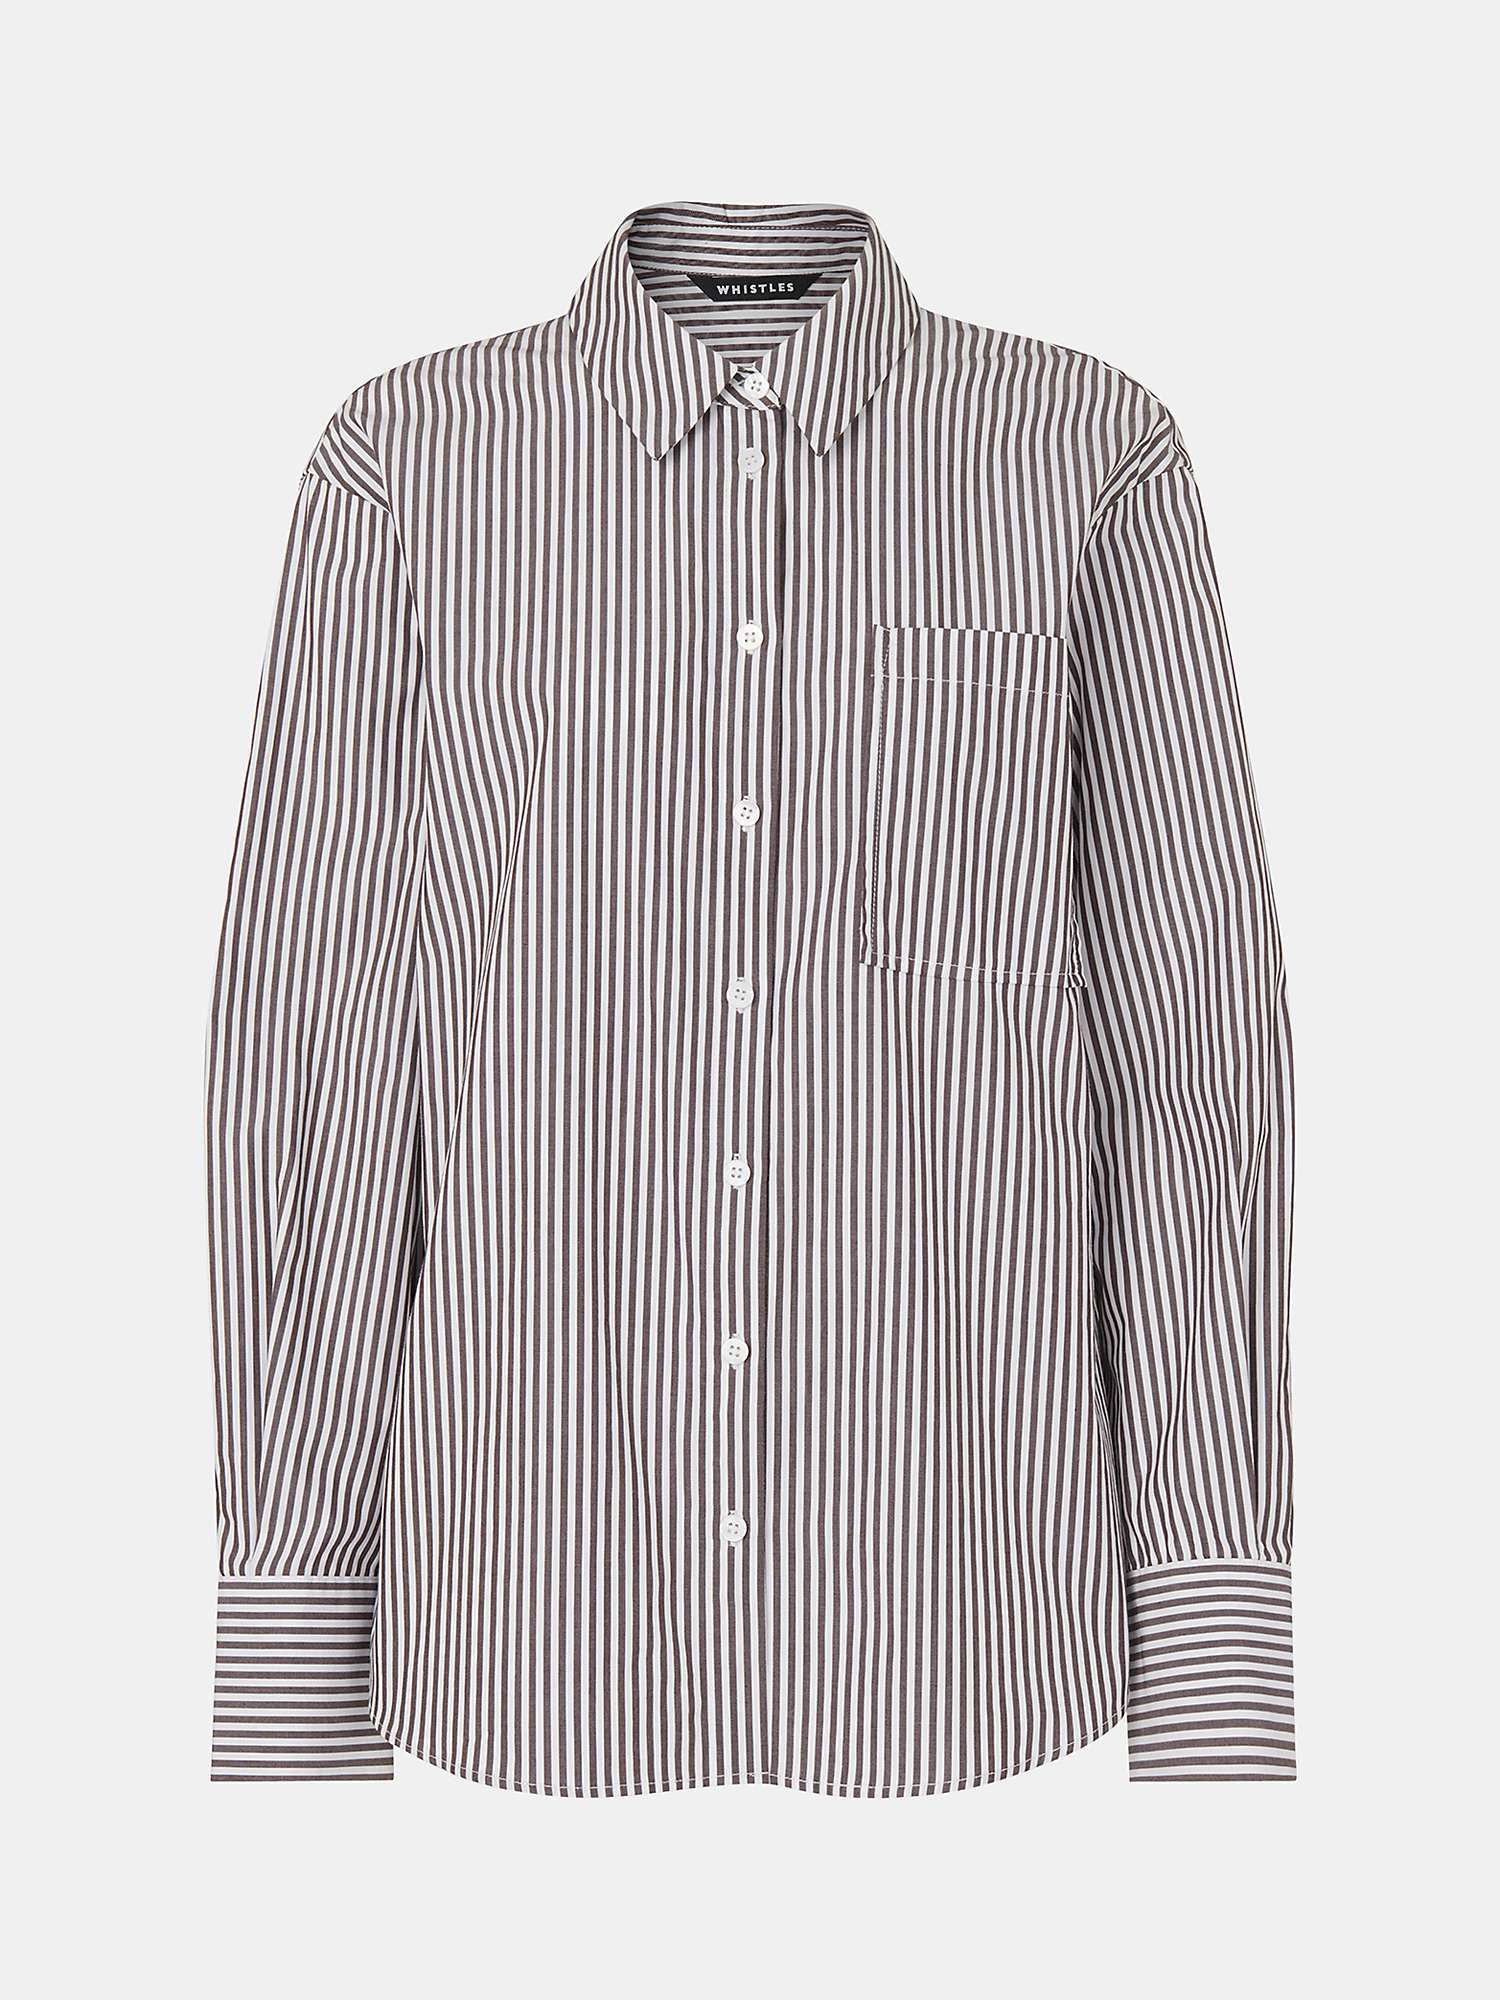 Buy Whistles Petite Striped Relaxed Fit Shirt, Black/White Online at johnlewis.com